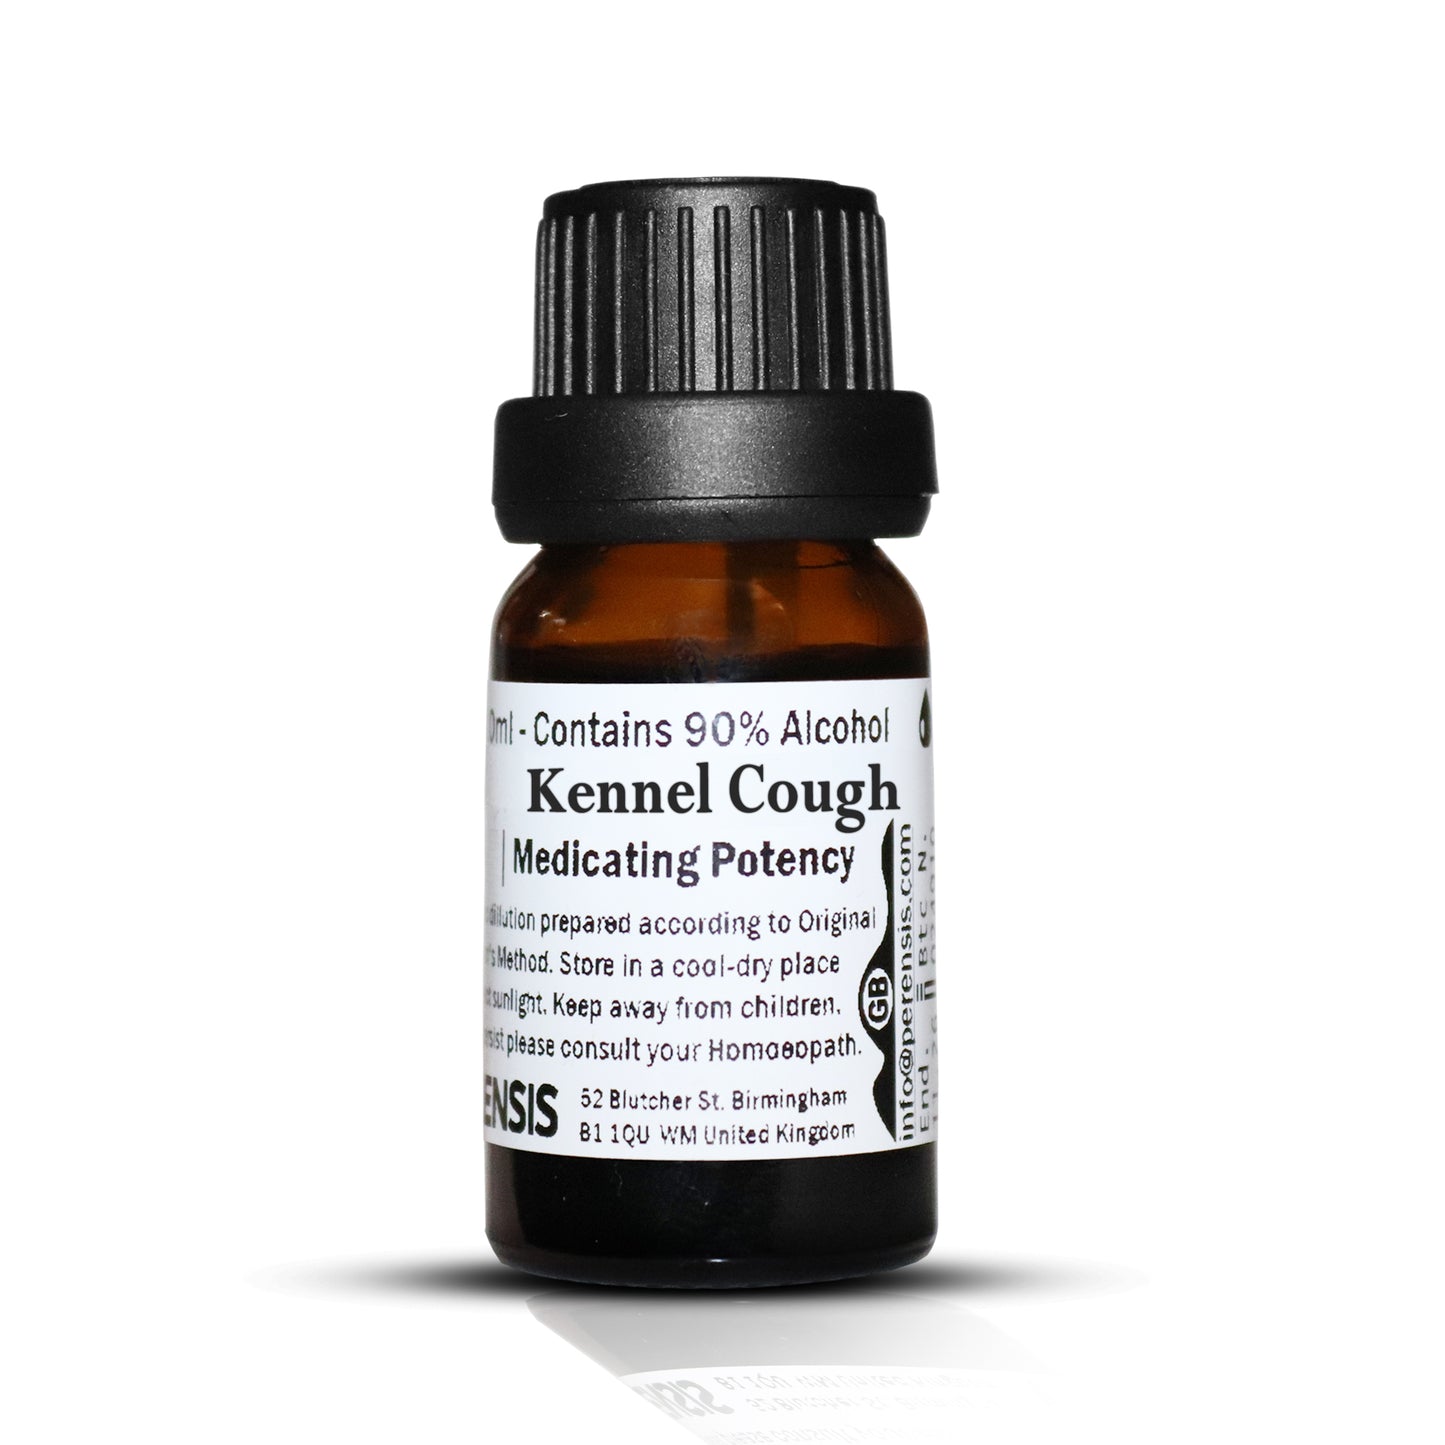 Kennel Cough